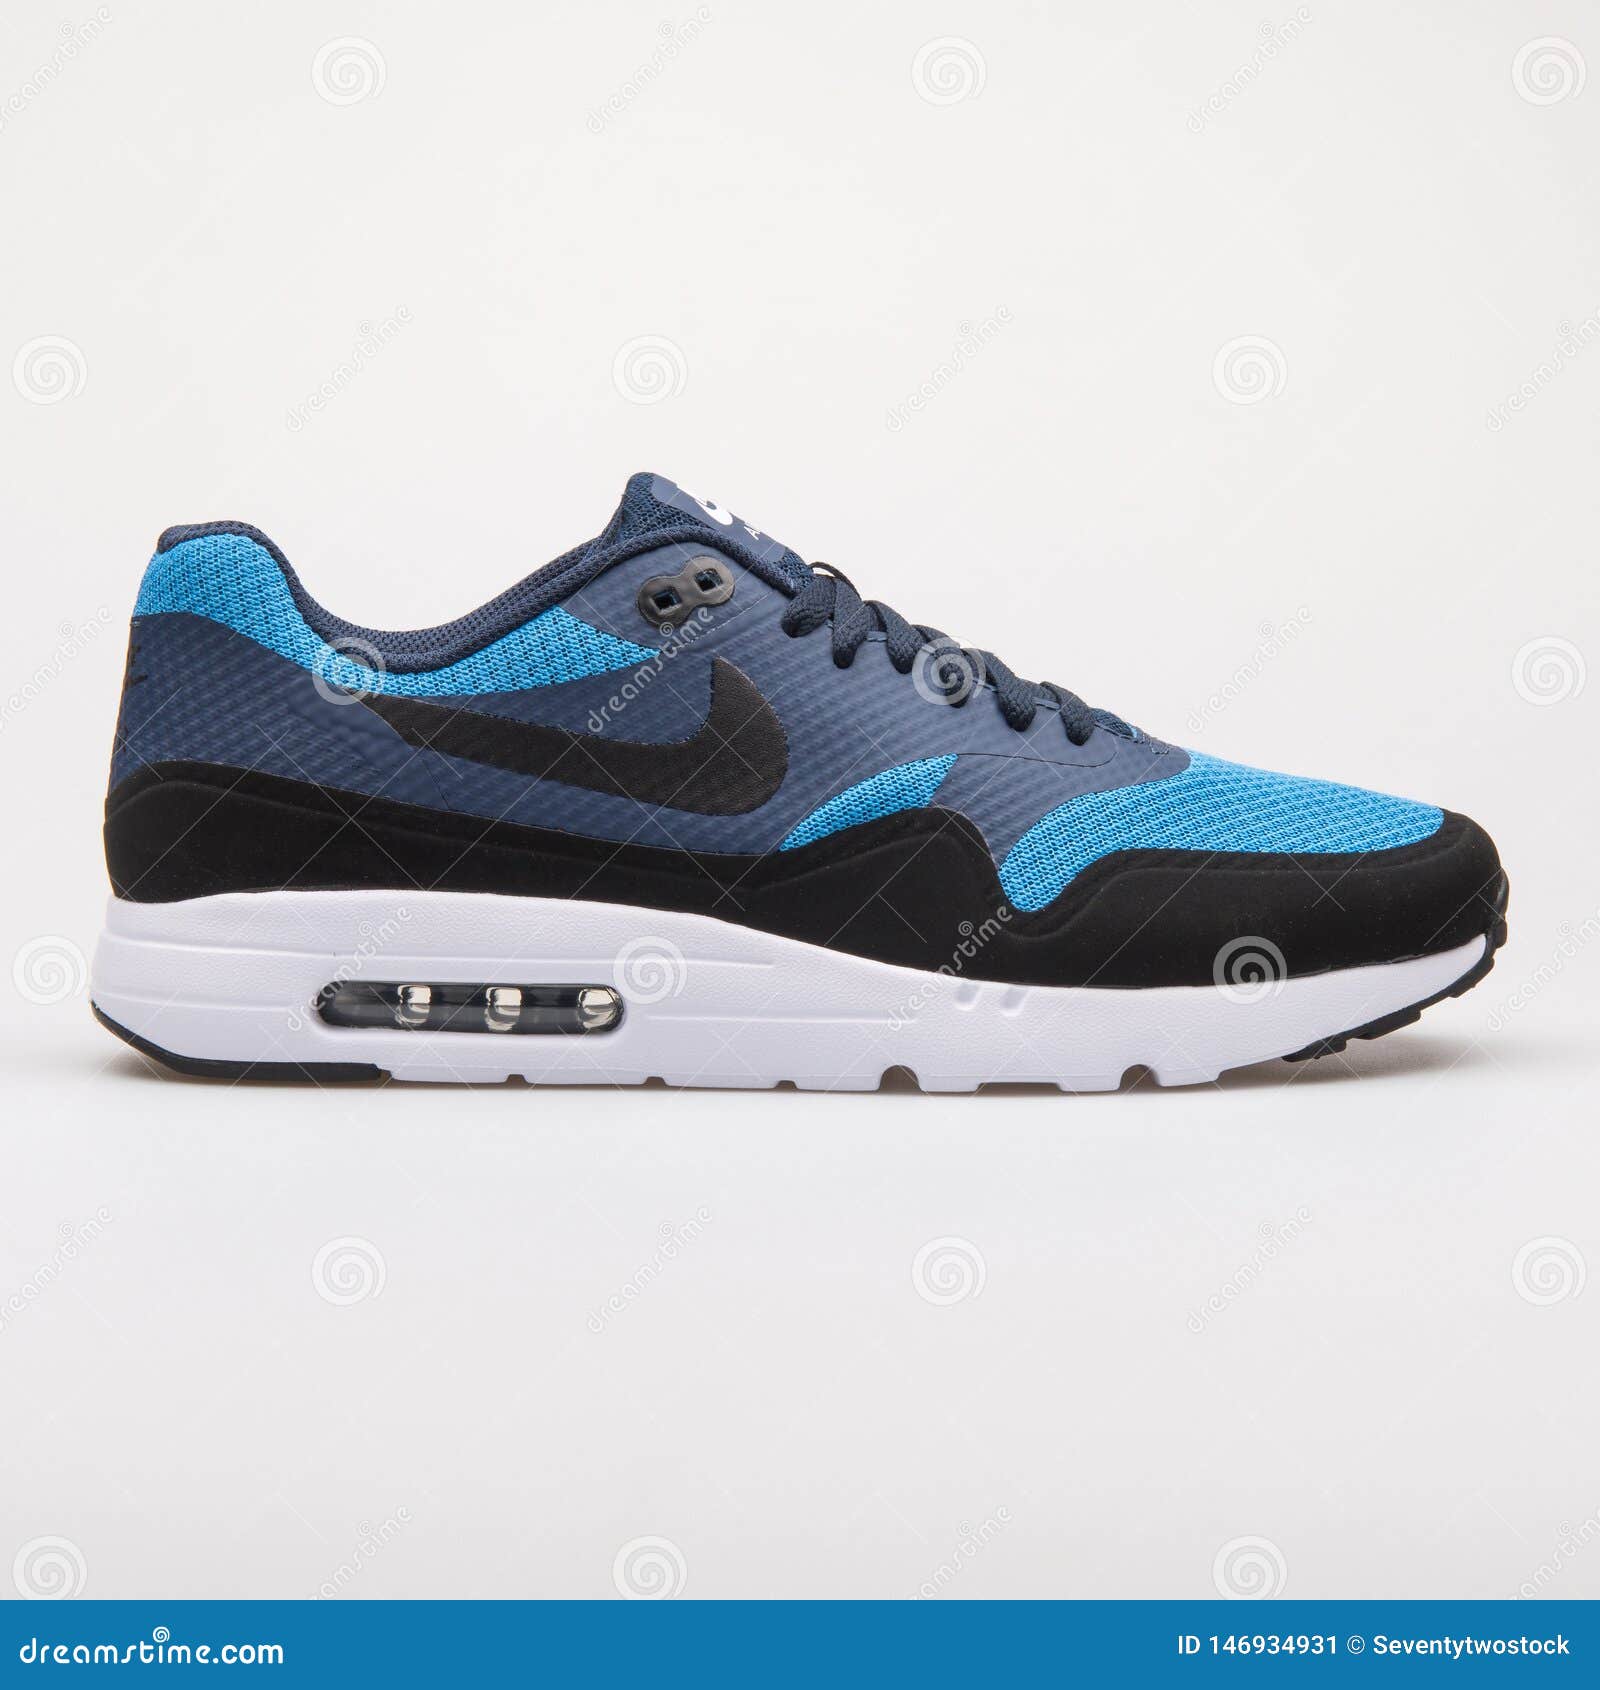 Continental Blind Frail Nike Air Max 1 Ultra Essential Black, Blue and Obsidian Sneaker Editorial  Photo - Image of color, equipment: 146934931